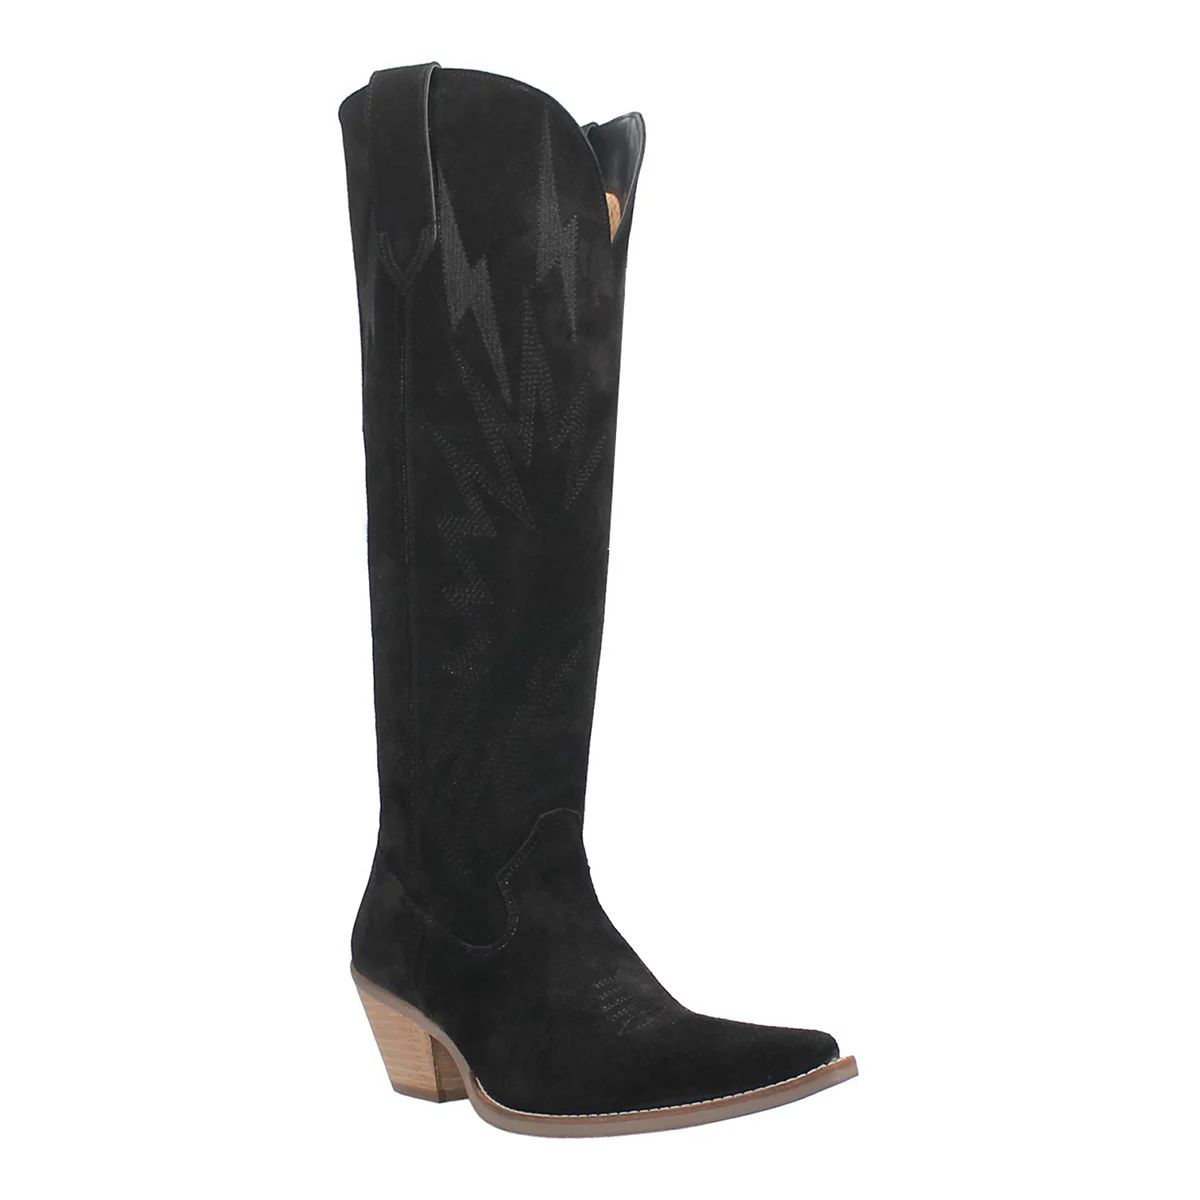 Dingo Thunder Road Women's Suede Knee-High Boots | Kohl's